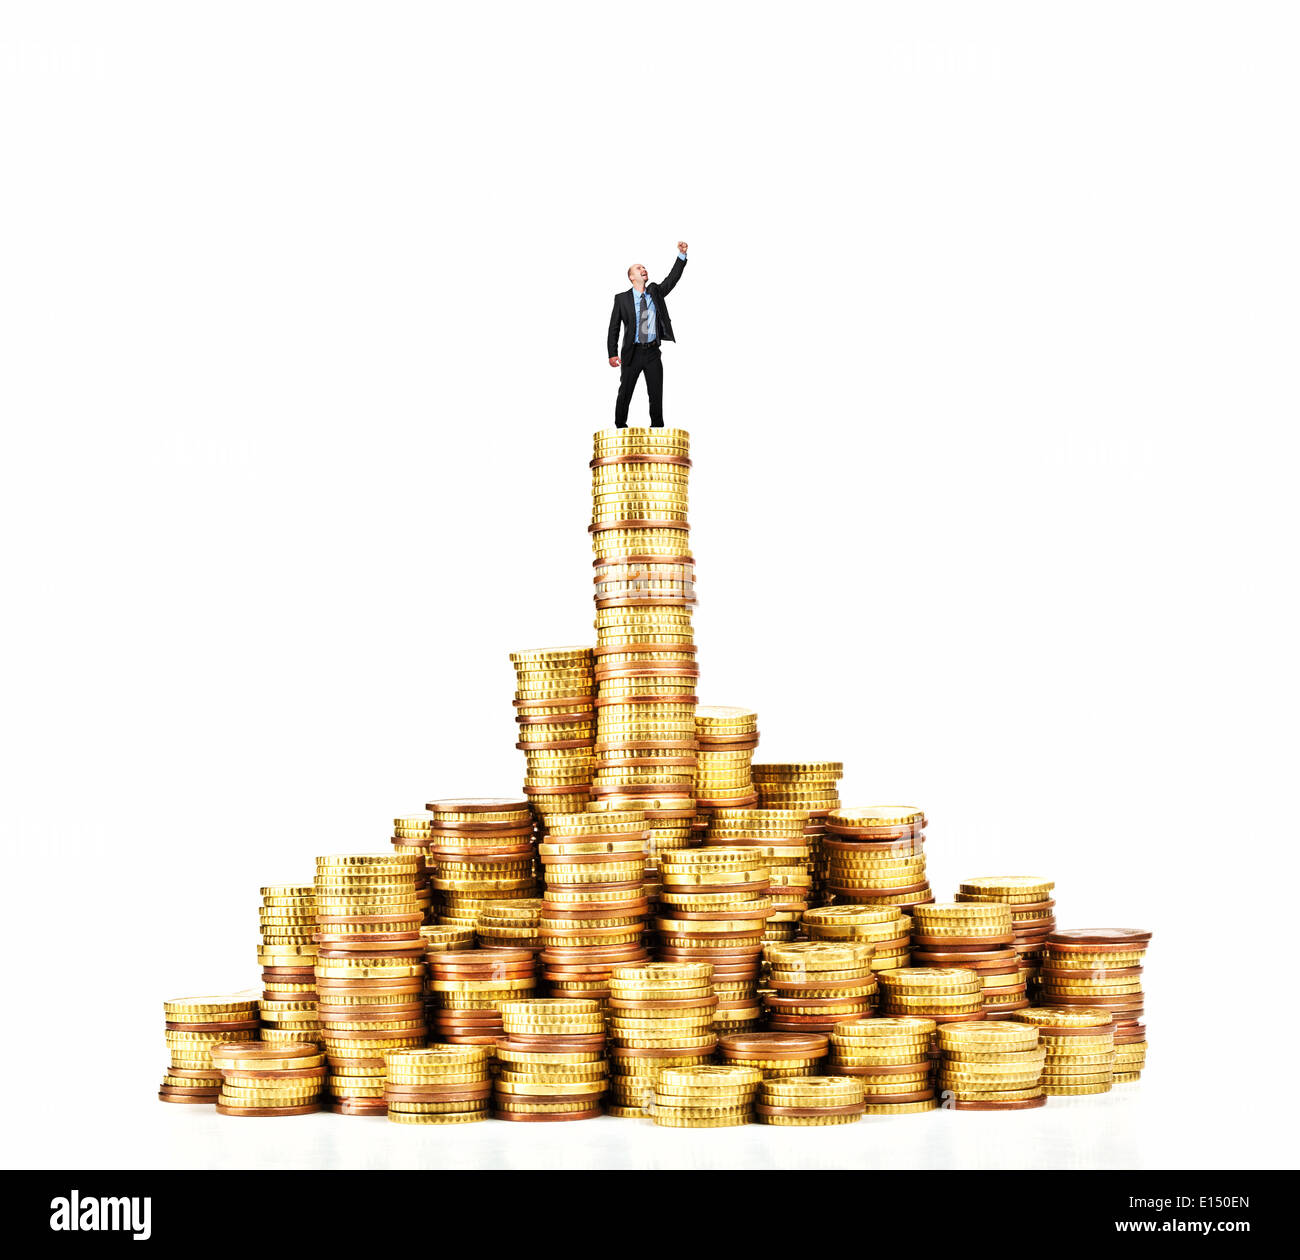 Man on pile of euro coins Banque D'Images